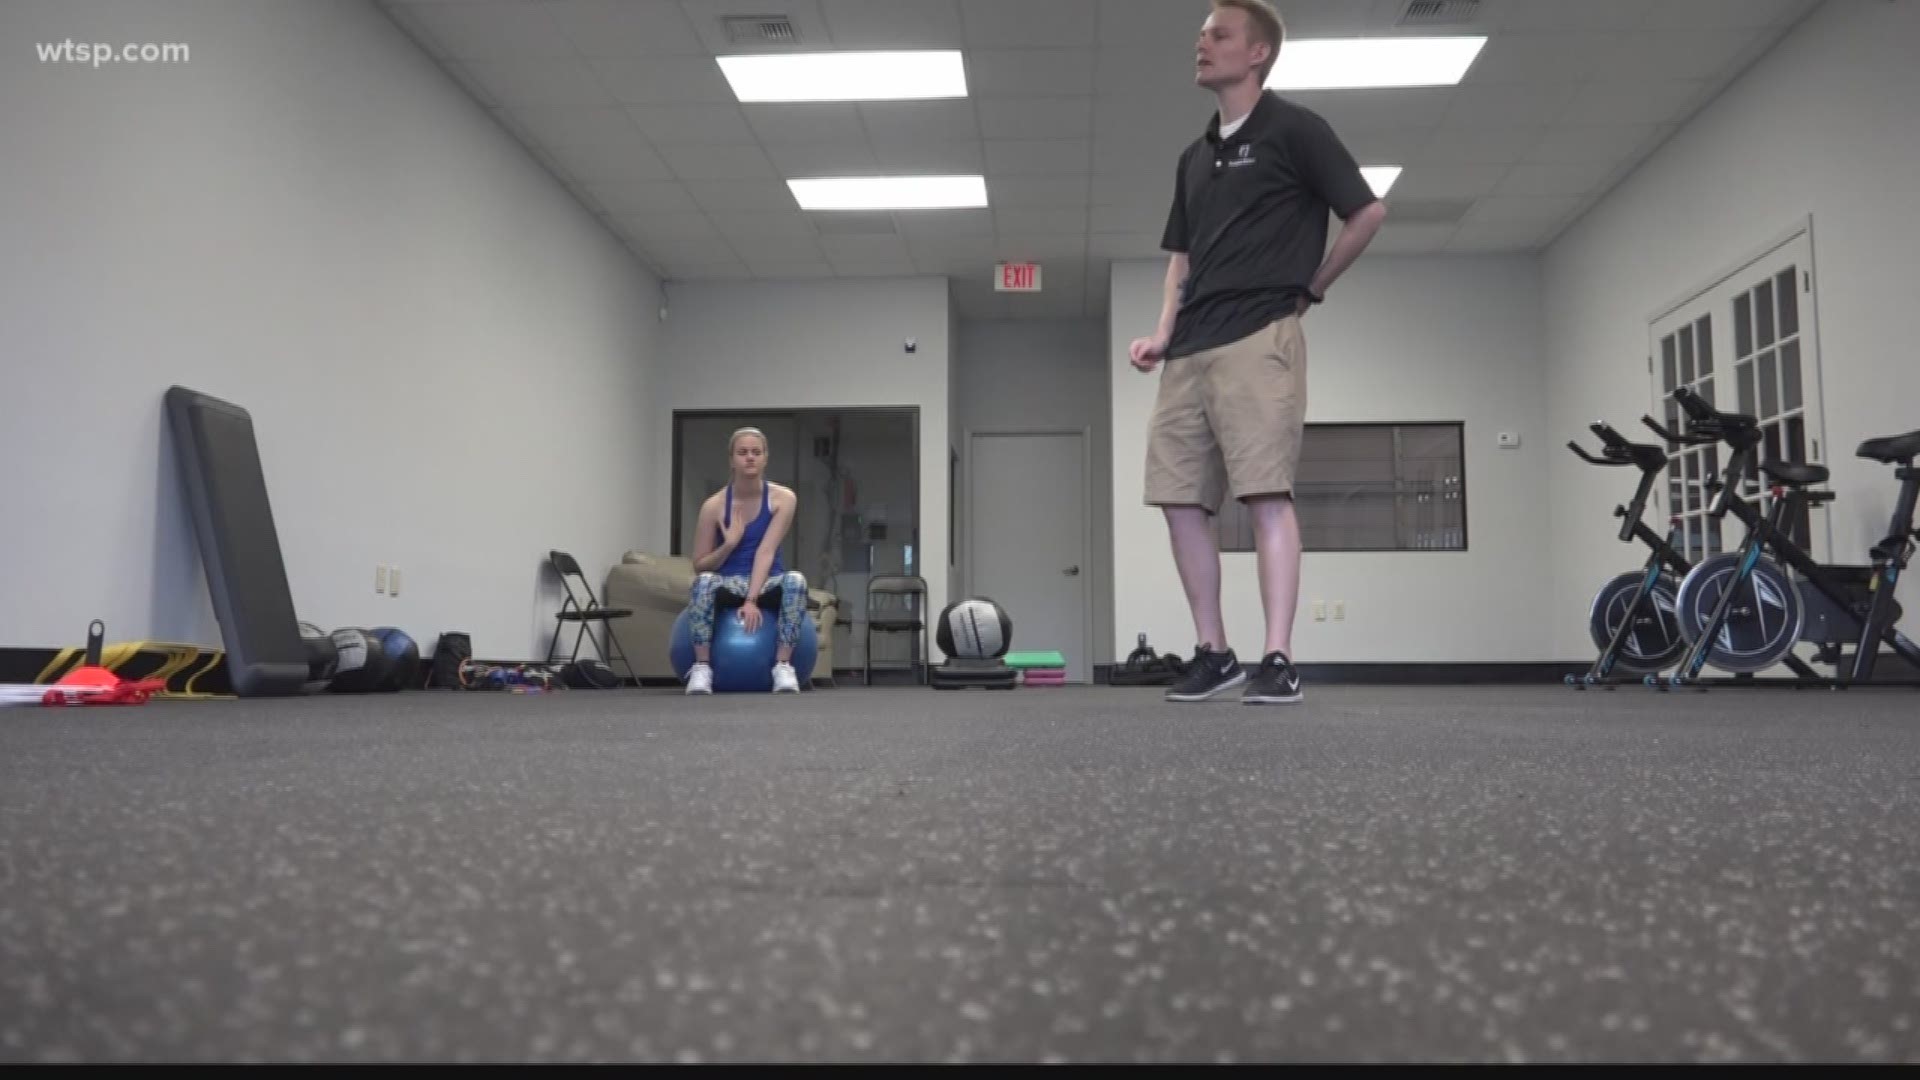 He's opened a gym to work with people with special needs.